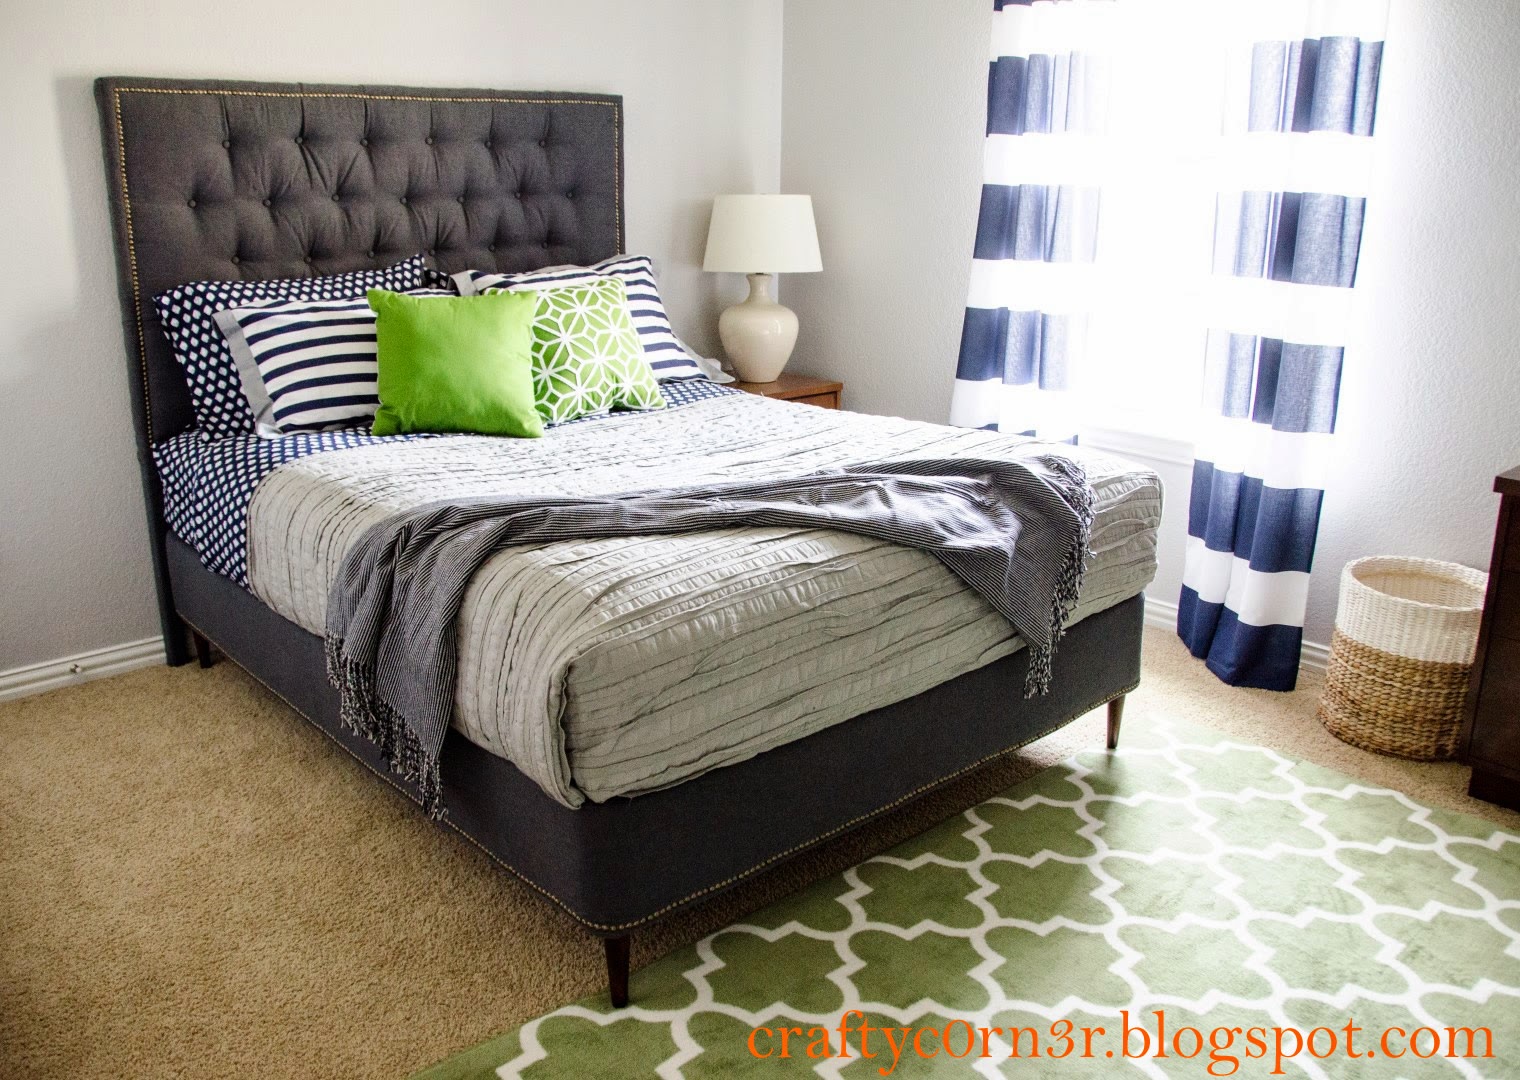 Converting A Box Spring Into Platform Bed, How To Hide Box Spring And Bed Frame